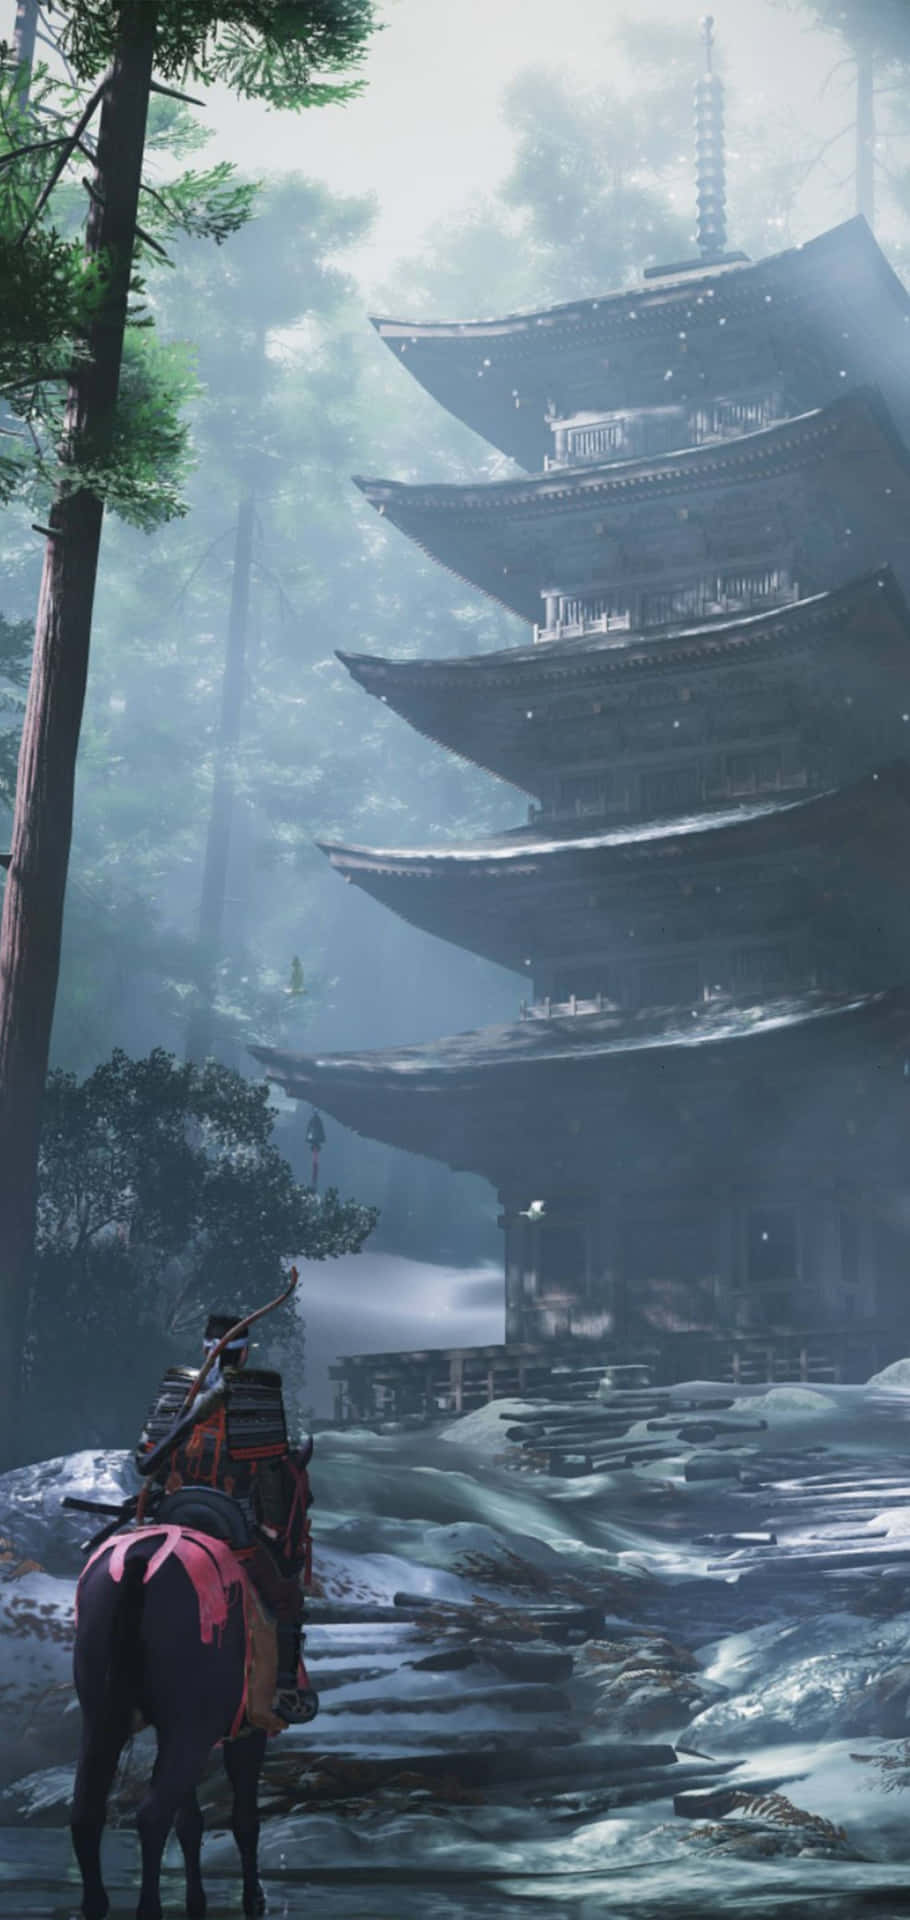  Ghost Of Tsushima Hintergrundbild 910x1920. Download Explore Feudal Japan on your iPhone with Ghost of Tsushima Wallpaper